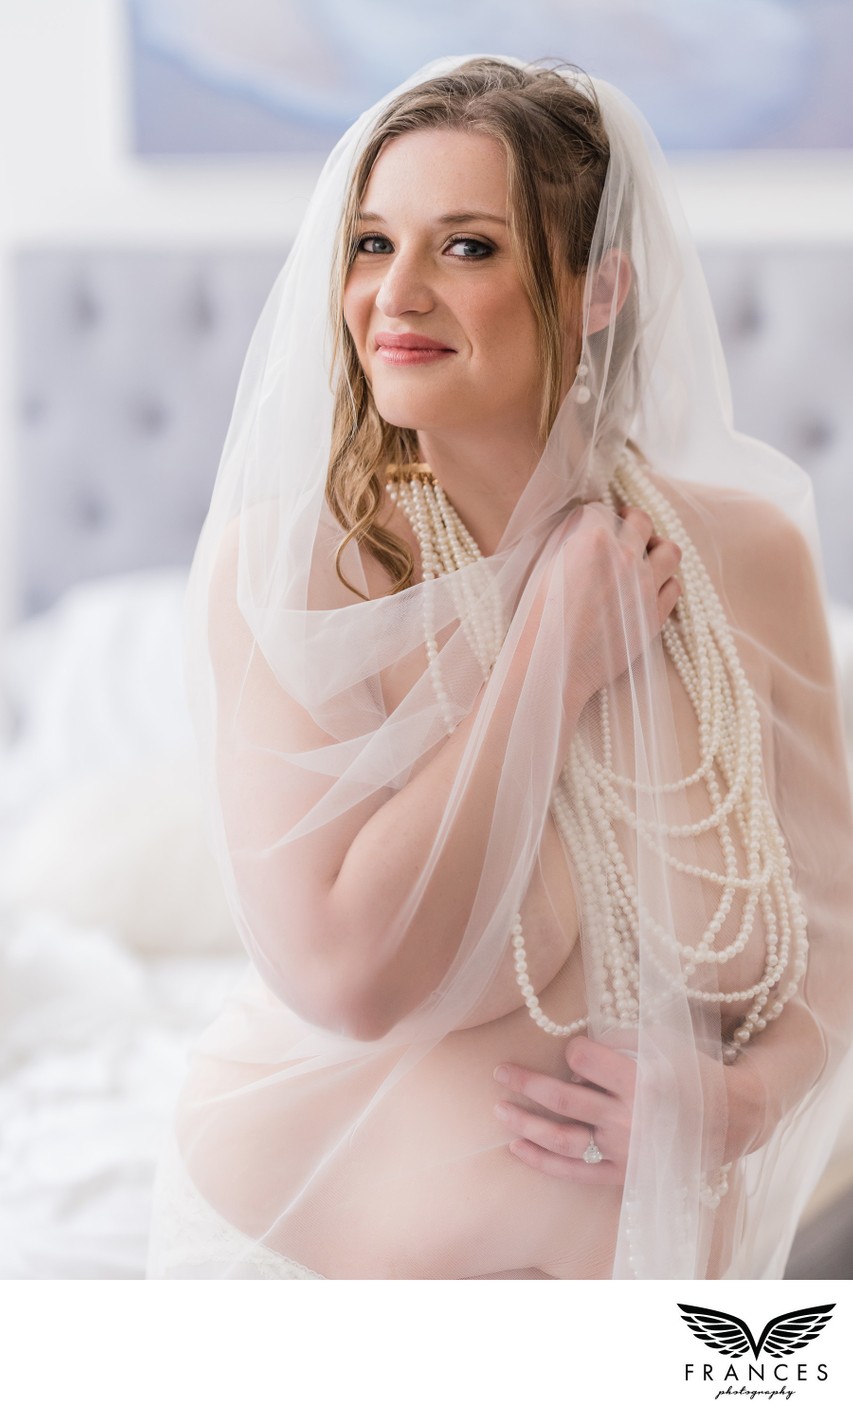 Bridal boudoir photography for a lucky husband to be